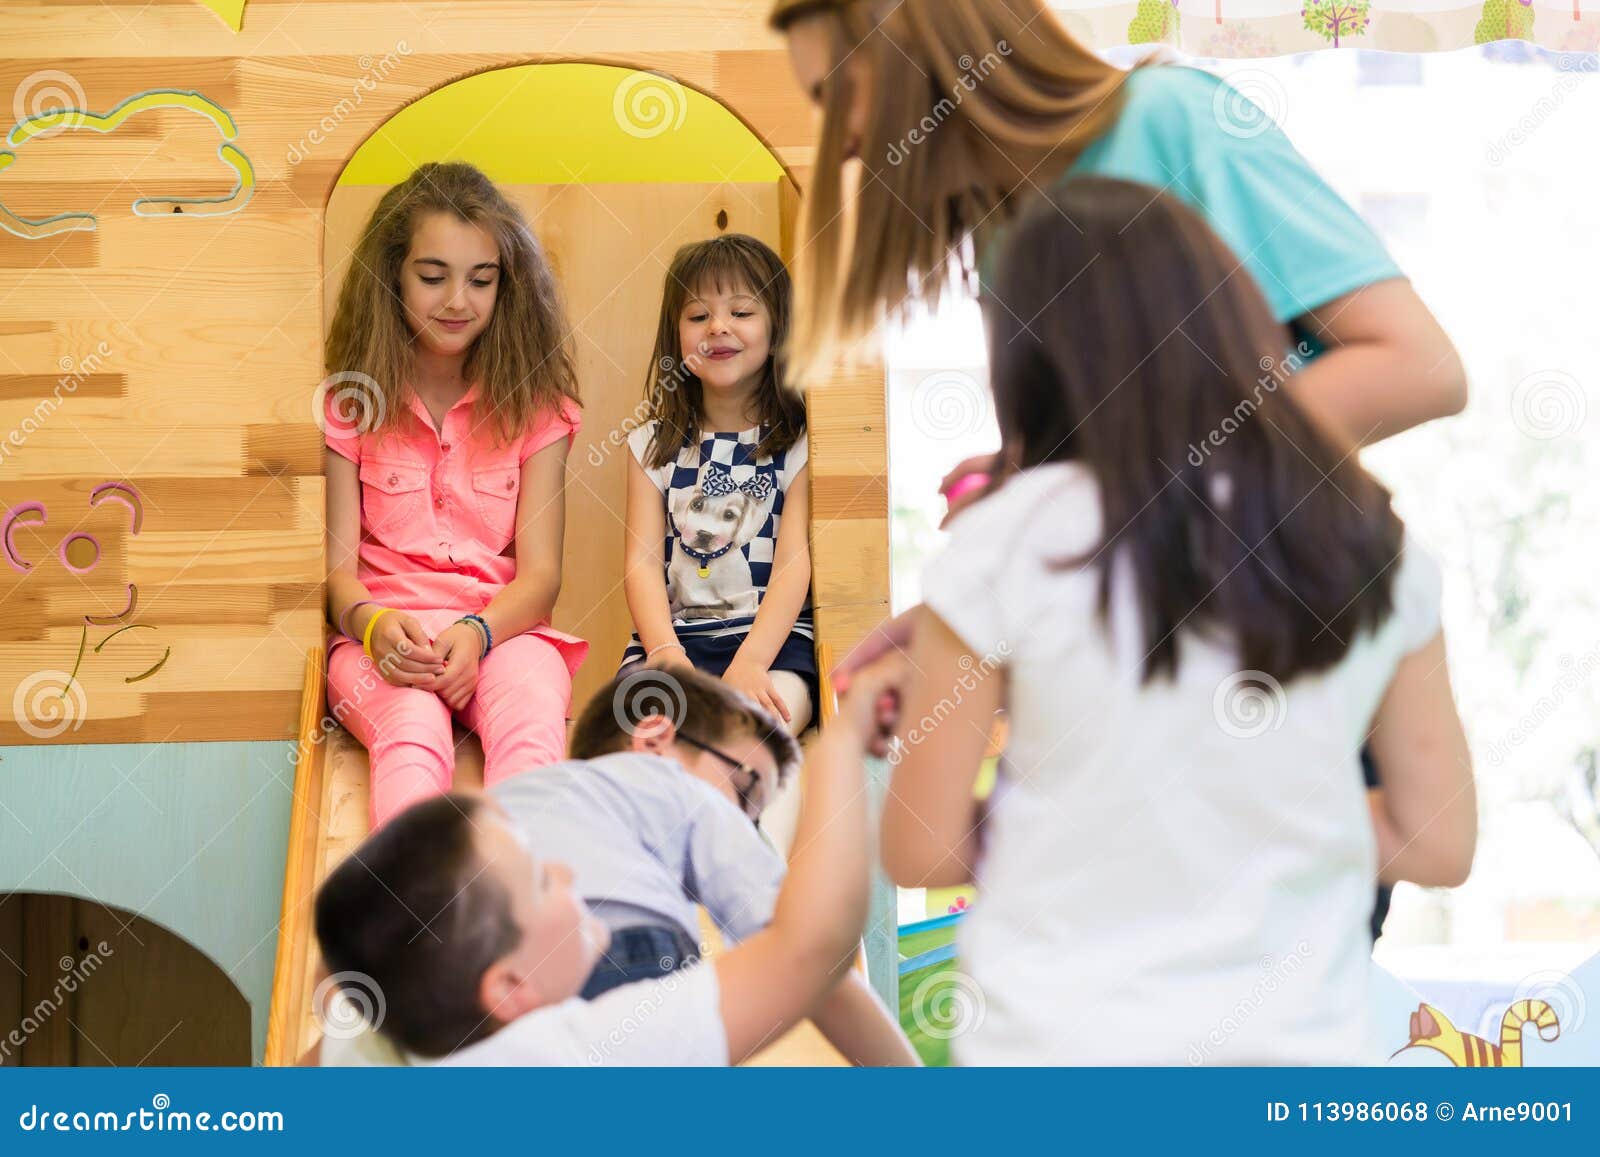 cute girls smiling during playtime supervised by a young teacher